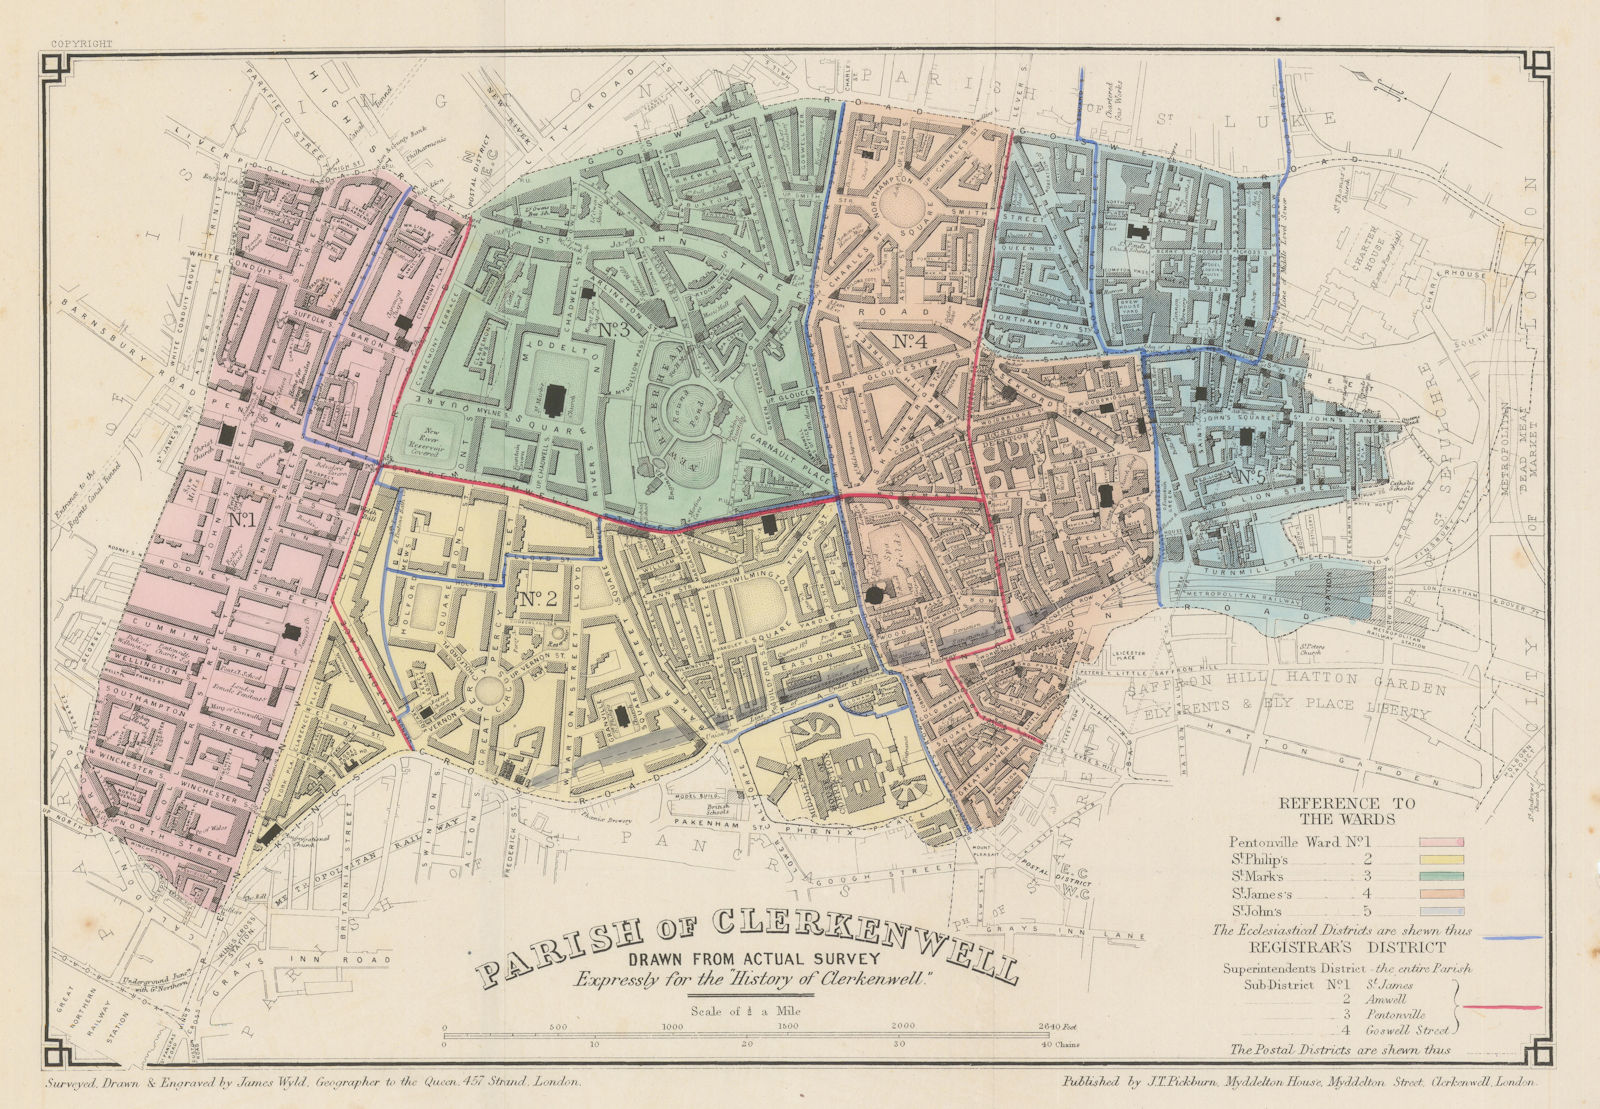 Associate Product Parish of Clerkenwell, drawn from an actual survey, by James Wyld 1865 old map